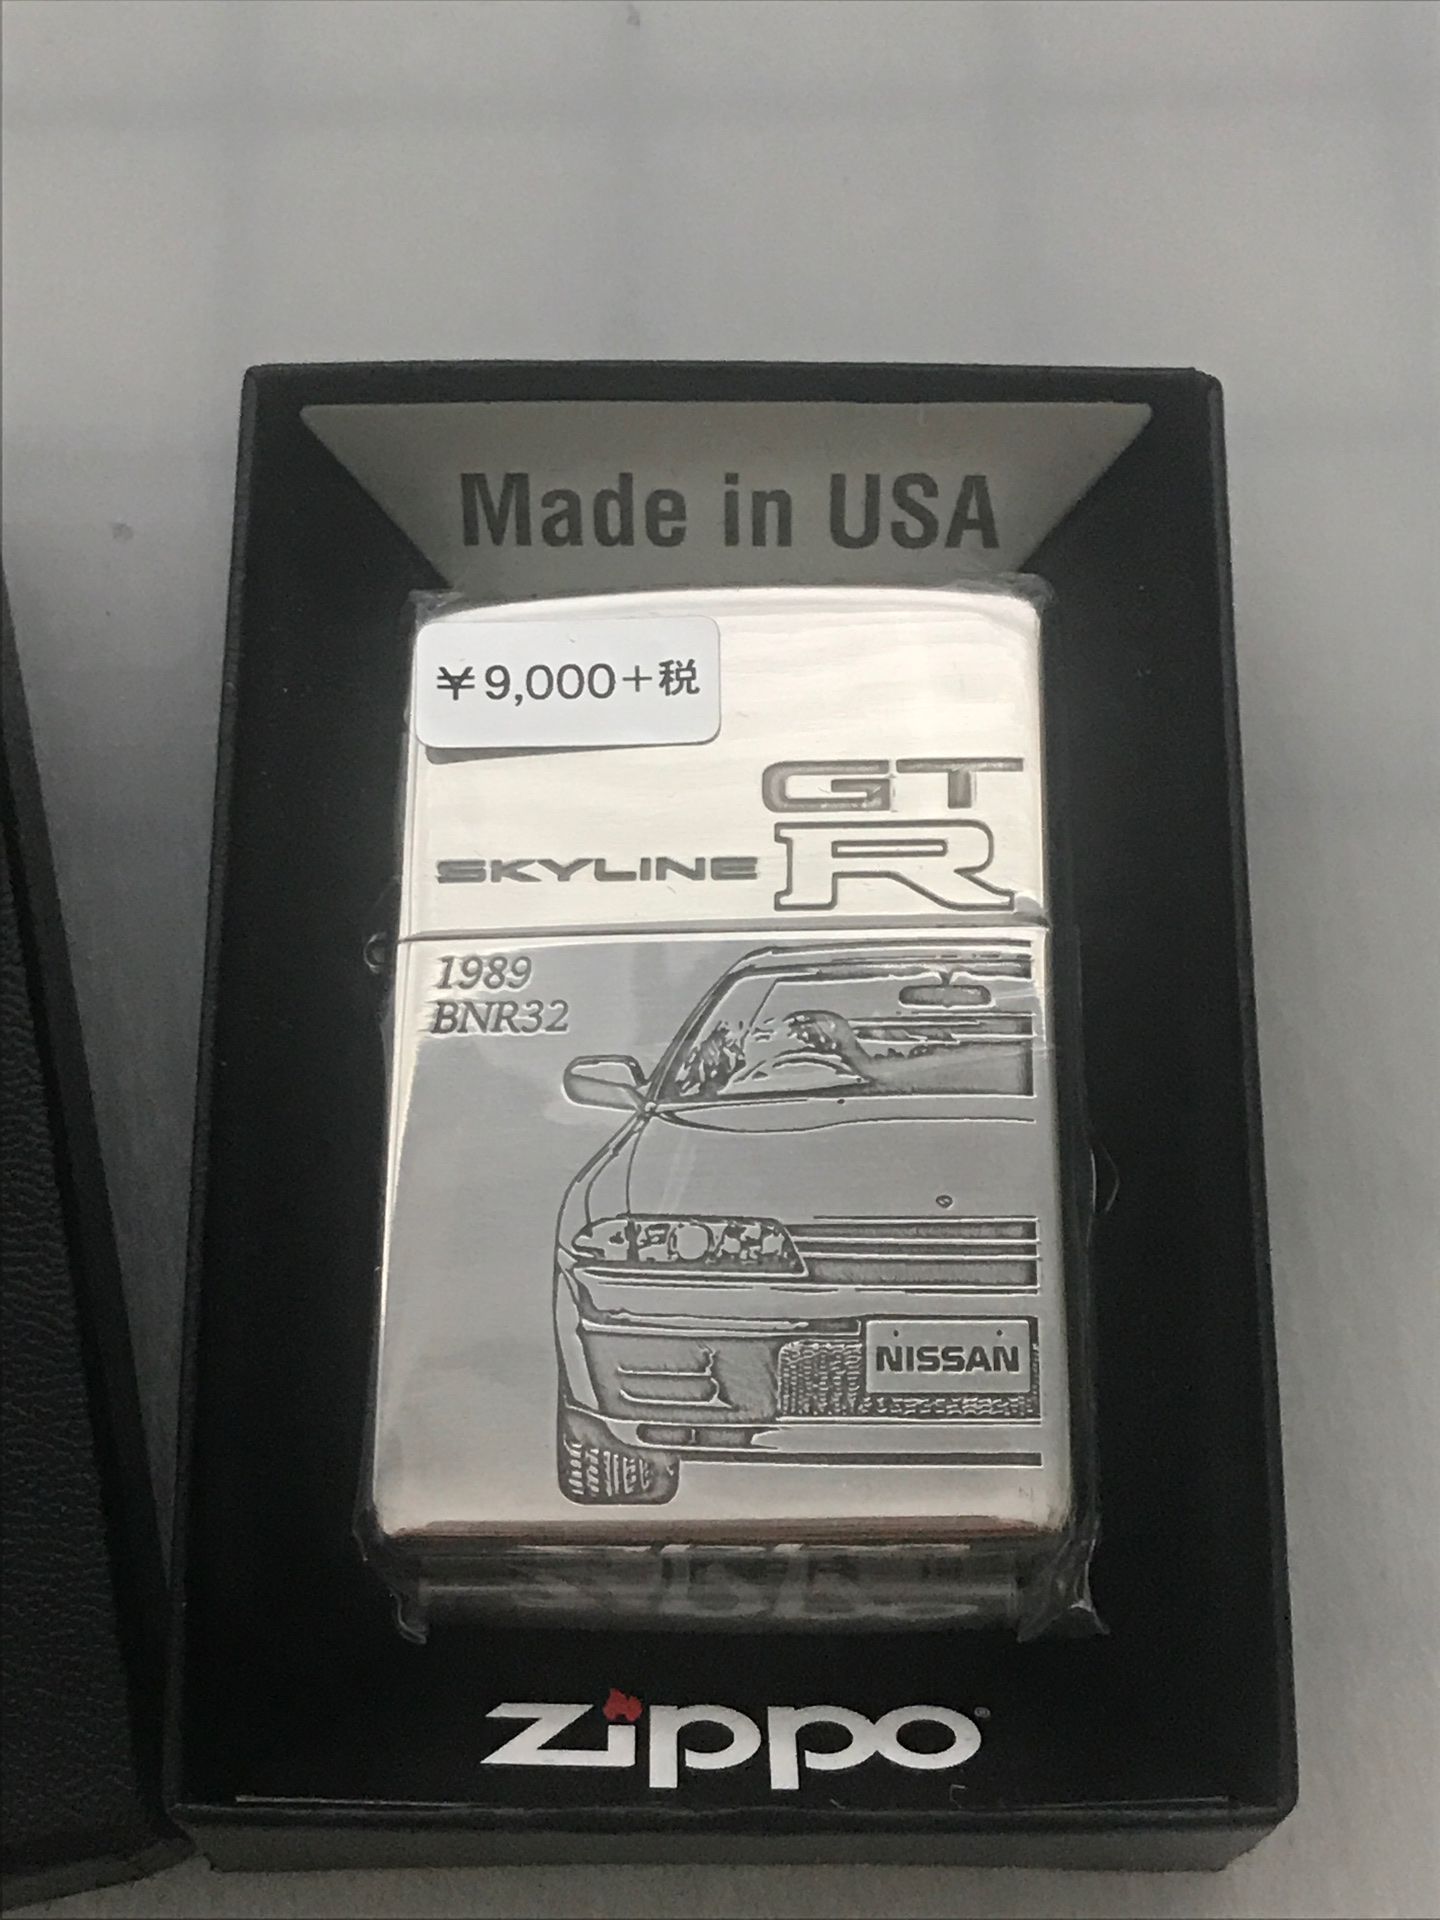 Collectible Zippo Lighter for Nissan Skyline R32